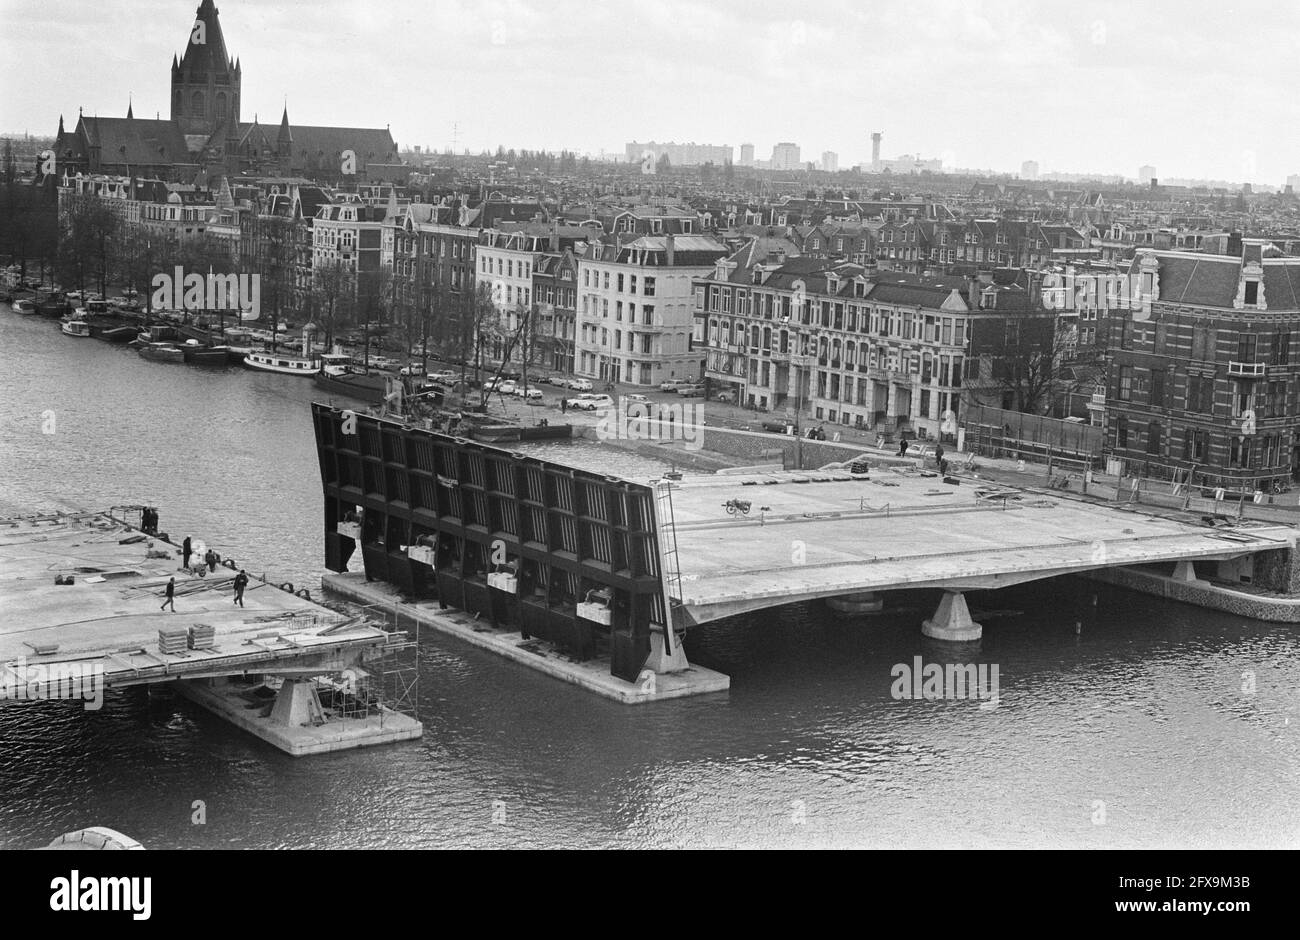 Bridge across the Amstel at Stadhouderskade, Amsterdam, overview of the works, 16 April 1969, Work, bridges, views, The Netherlands, 20th century press agency photo, news to remember, documentary, historic photography 1945-1990, visual stories, human history of the Twentieth Century, capturing moments in time Stock Photo